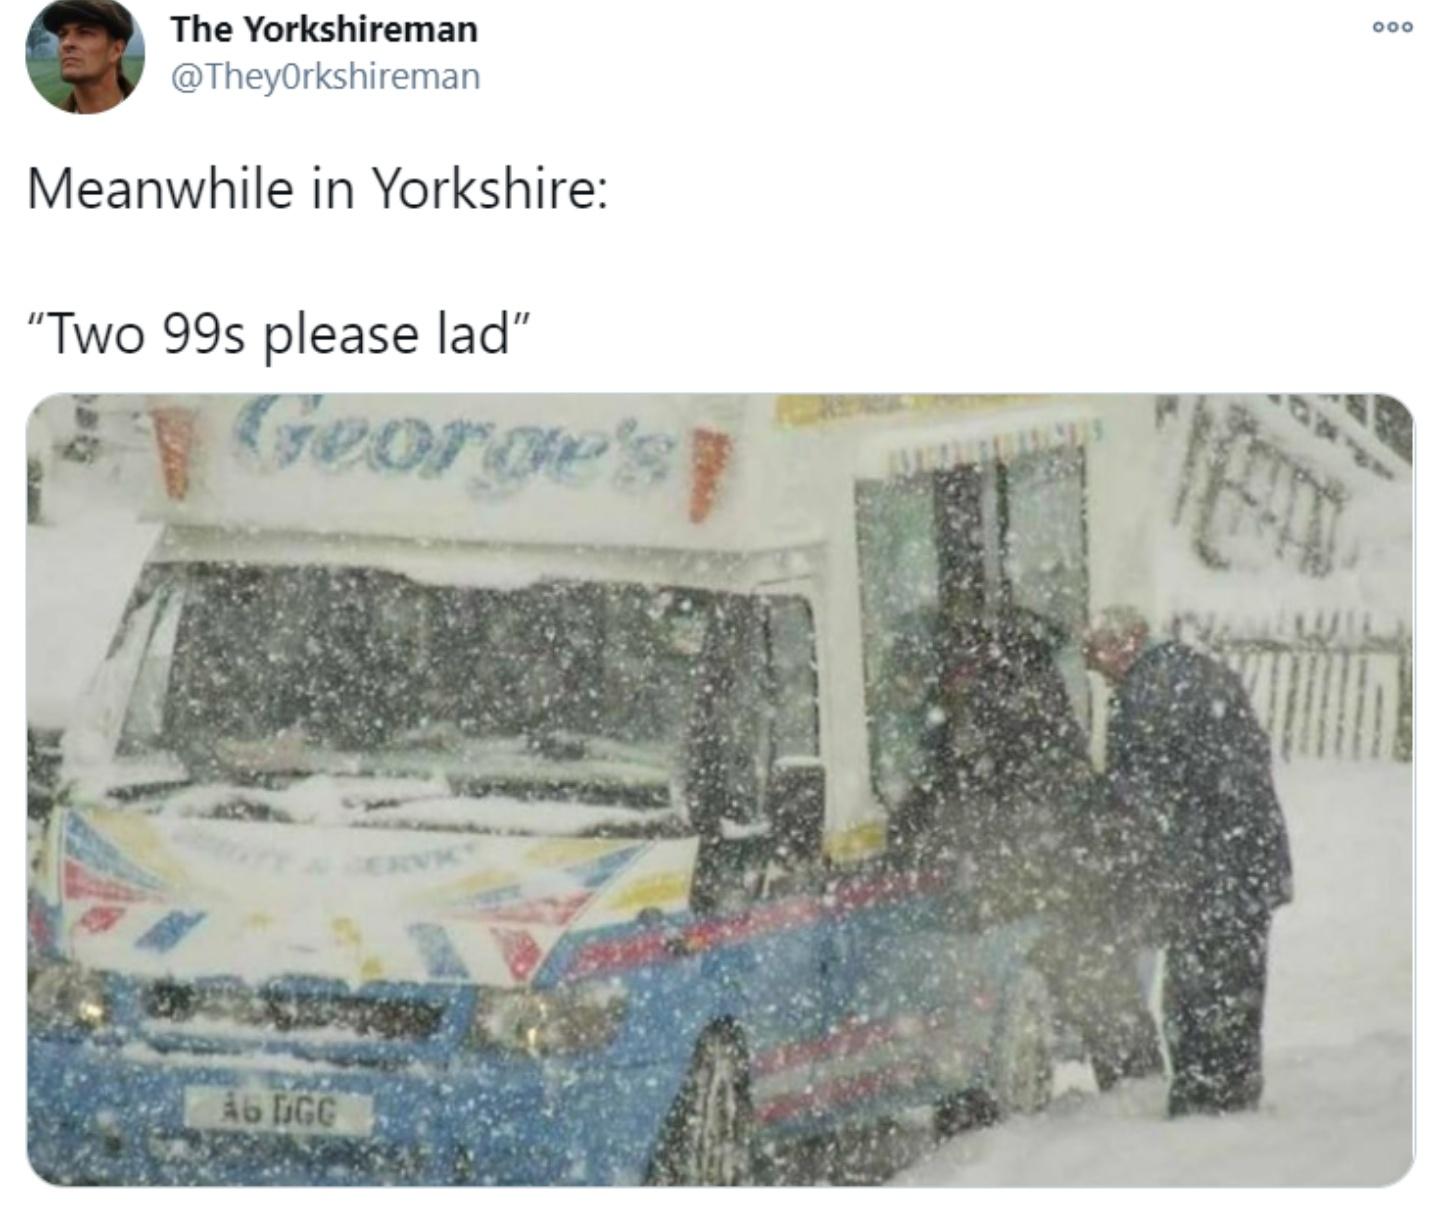 meanwhile in yorkshire - Ooo The Yorkshireman Meanwhile in Yorkshire "Two 99s please lad" George'st Ab Egg